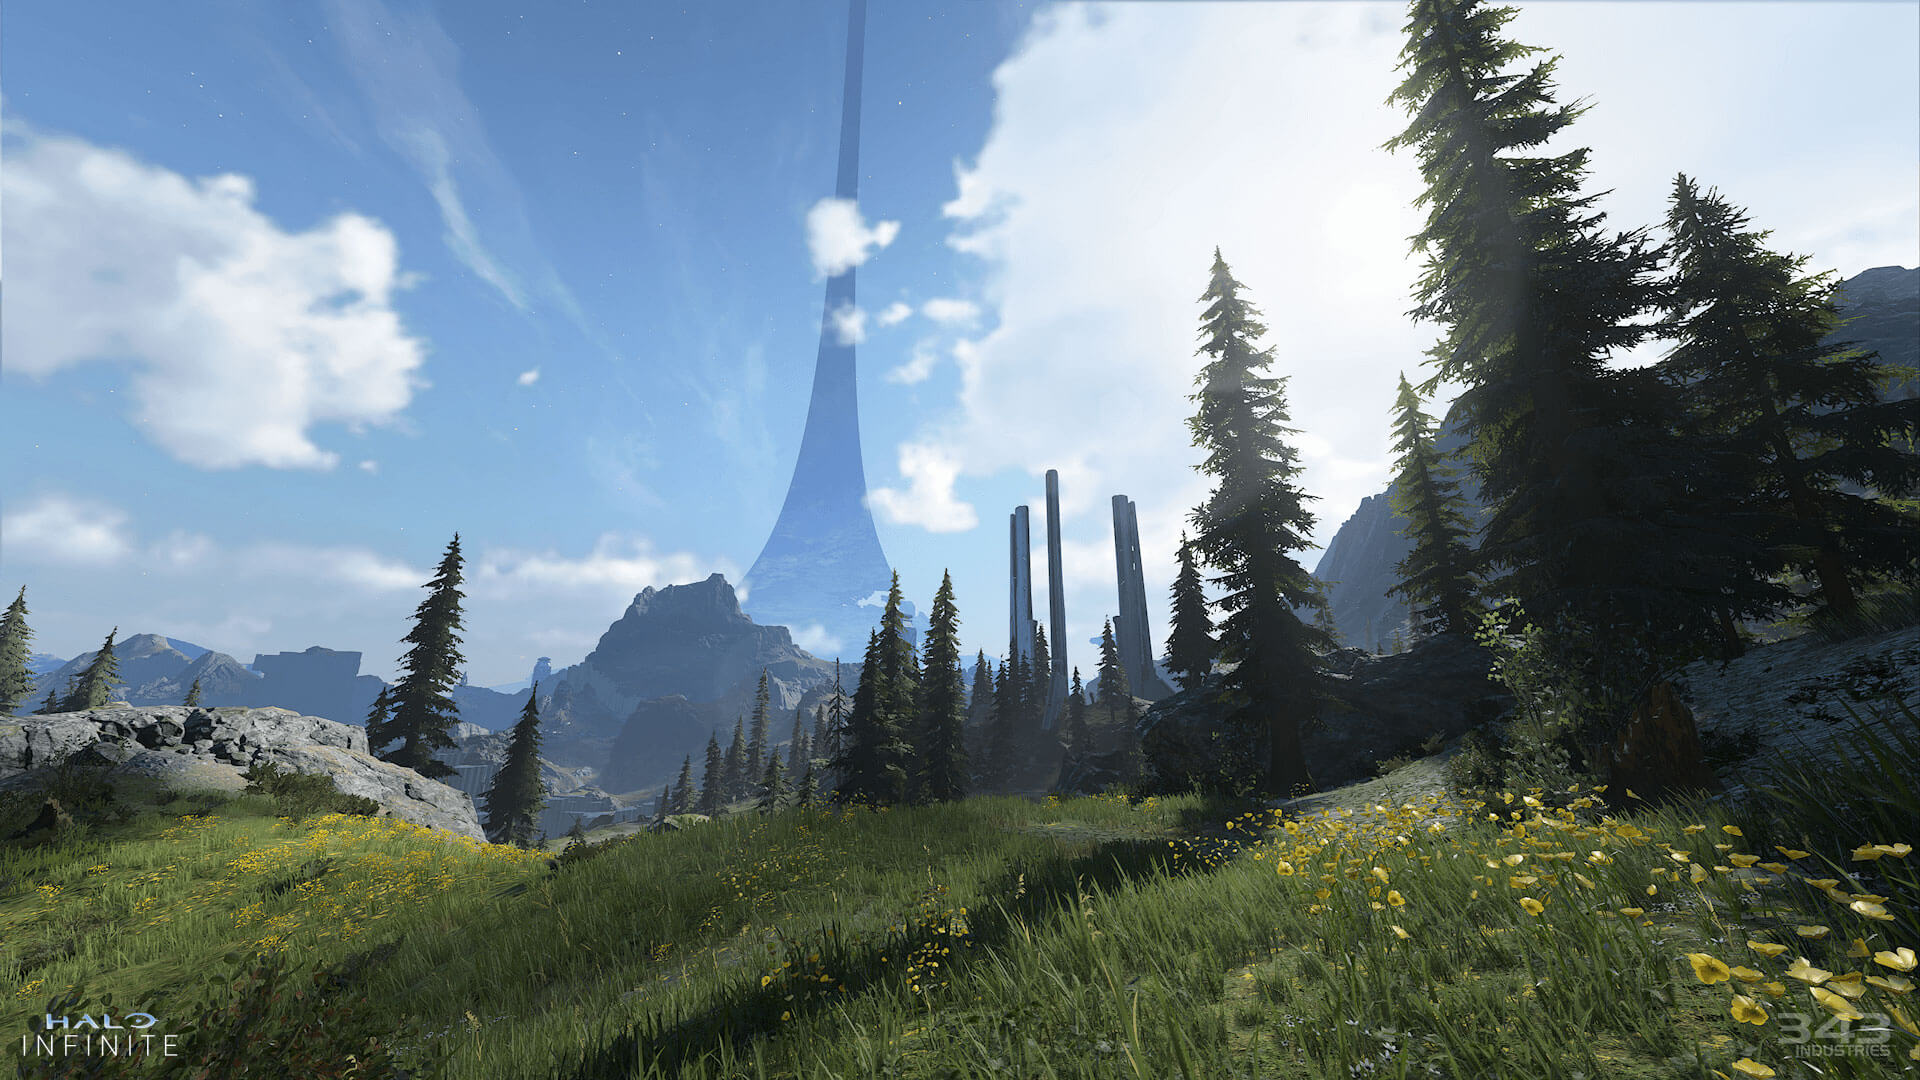 A screenshot of a forested landscape from Halo Infinite.